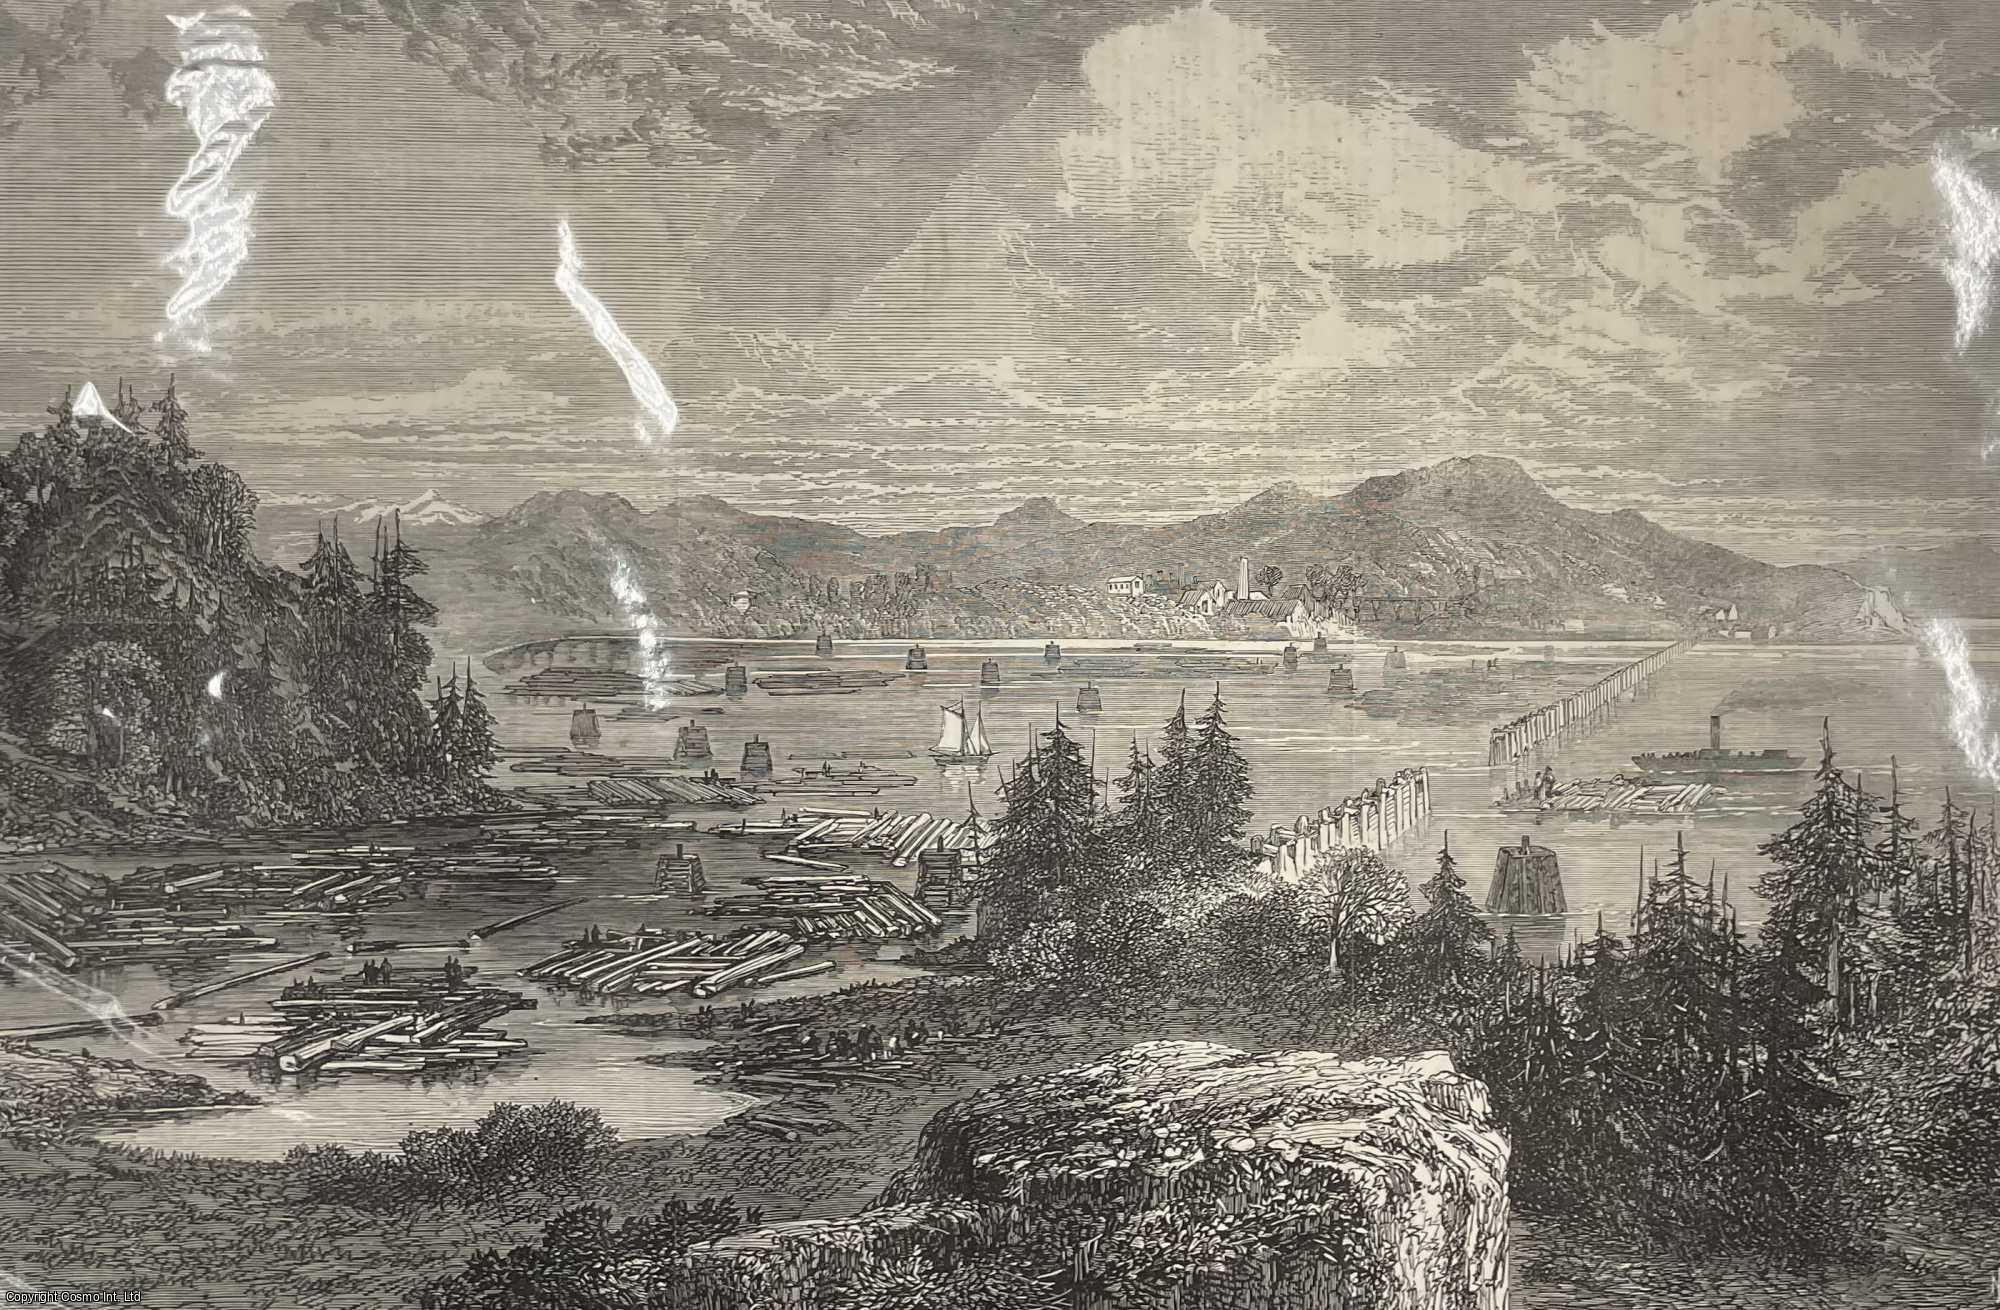 CANADA - Timber-Booms on the St. John River, New Brunswick. An original print from the Illustrated London News, 1866.